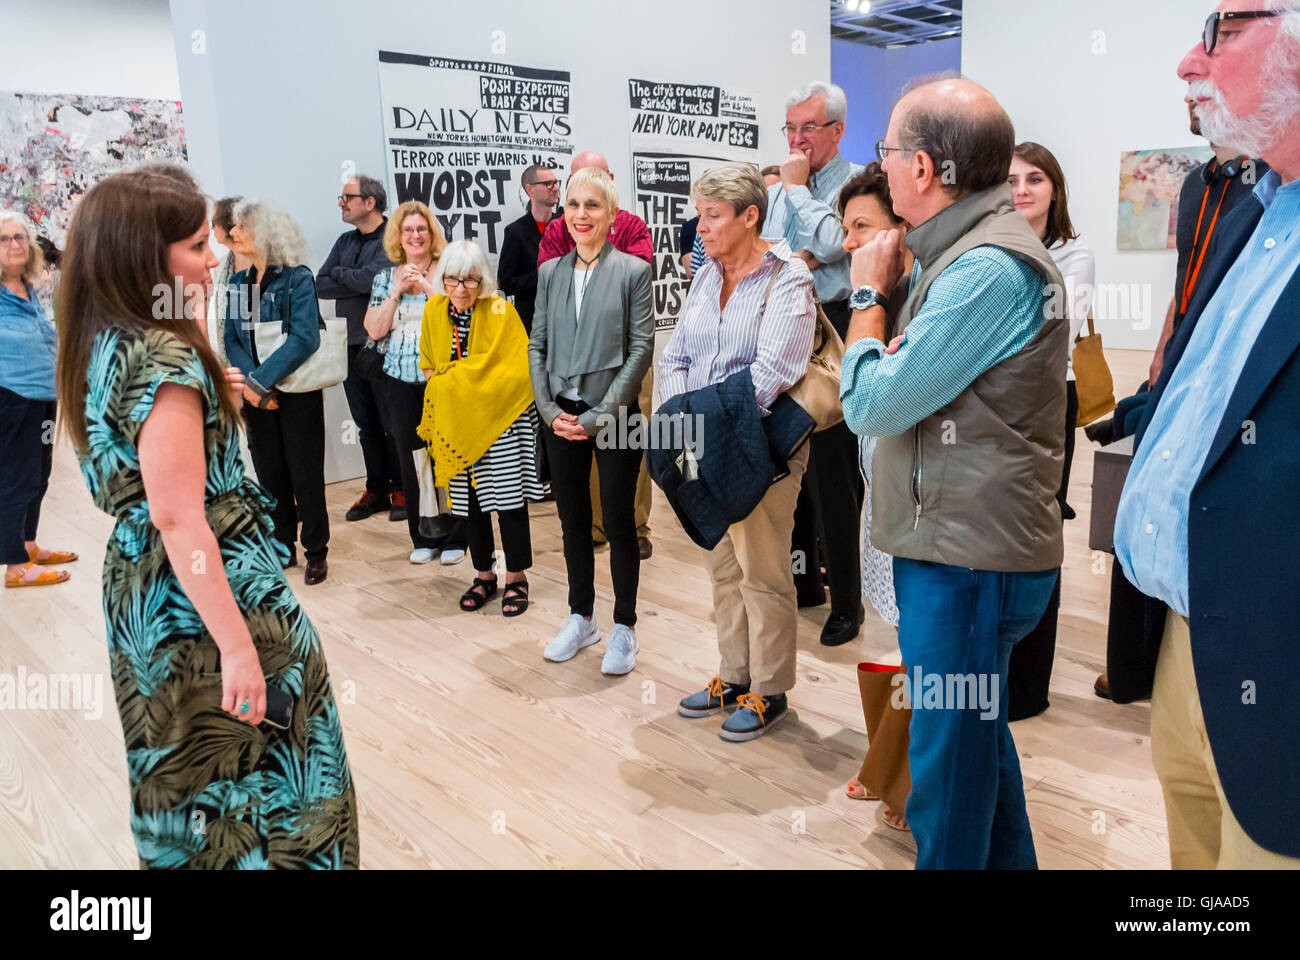 New York City, NY, USA, Crowd of Tourists Listening to Tour Guide in Modern American Art Gallery, Downtown Whitney Museum, in Meat Packing District Neighborhood, women giving talk Stock Photo